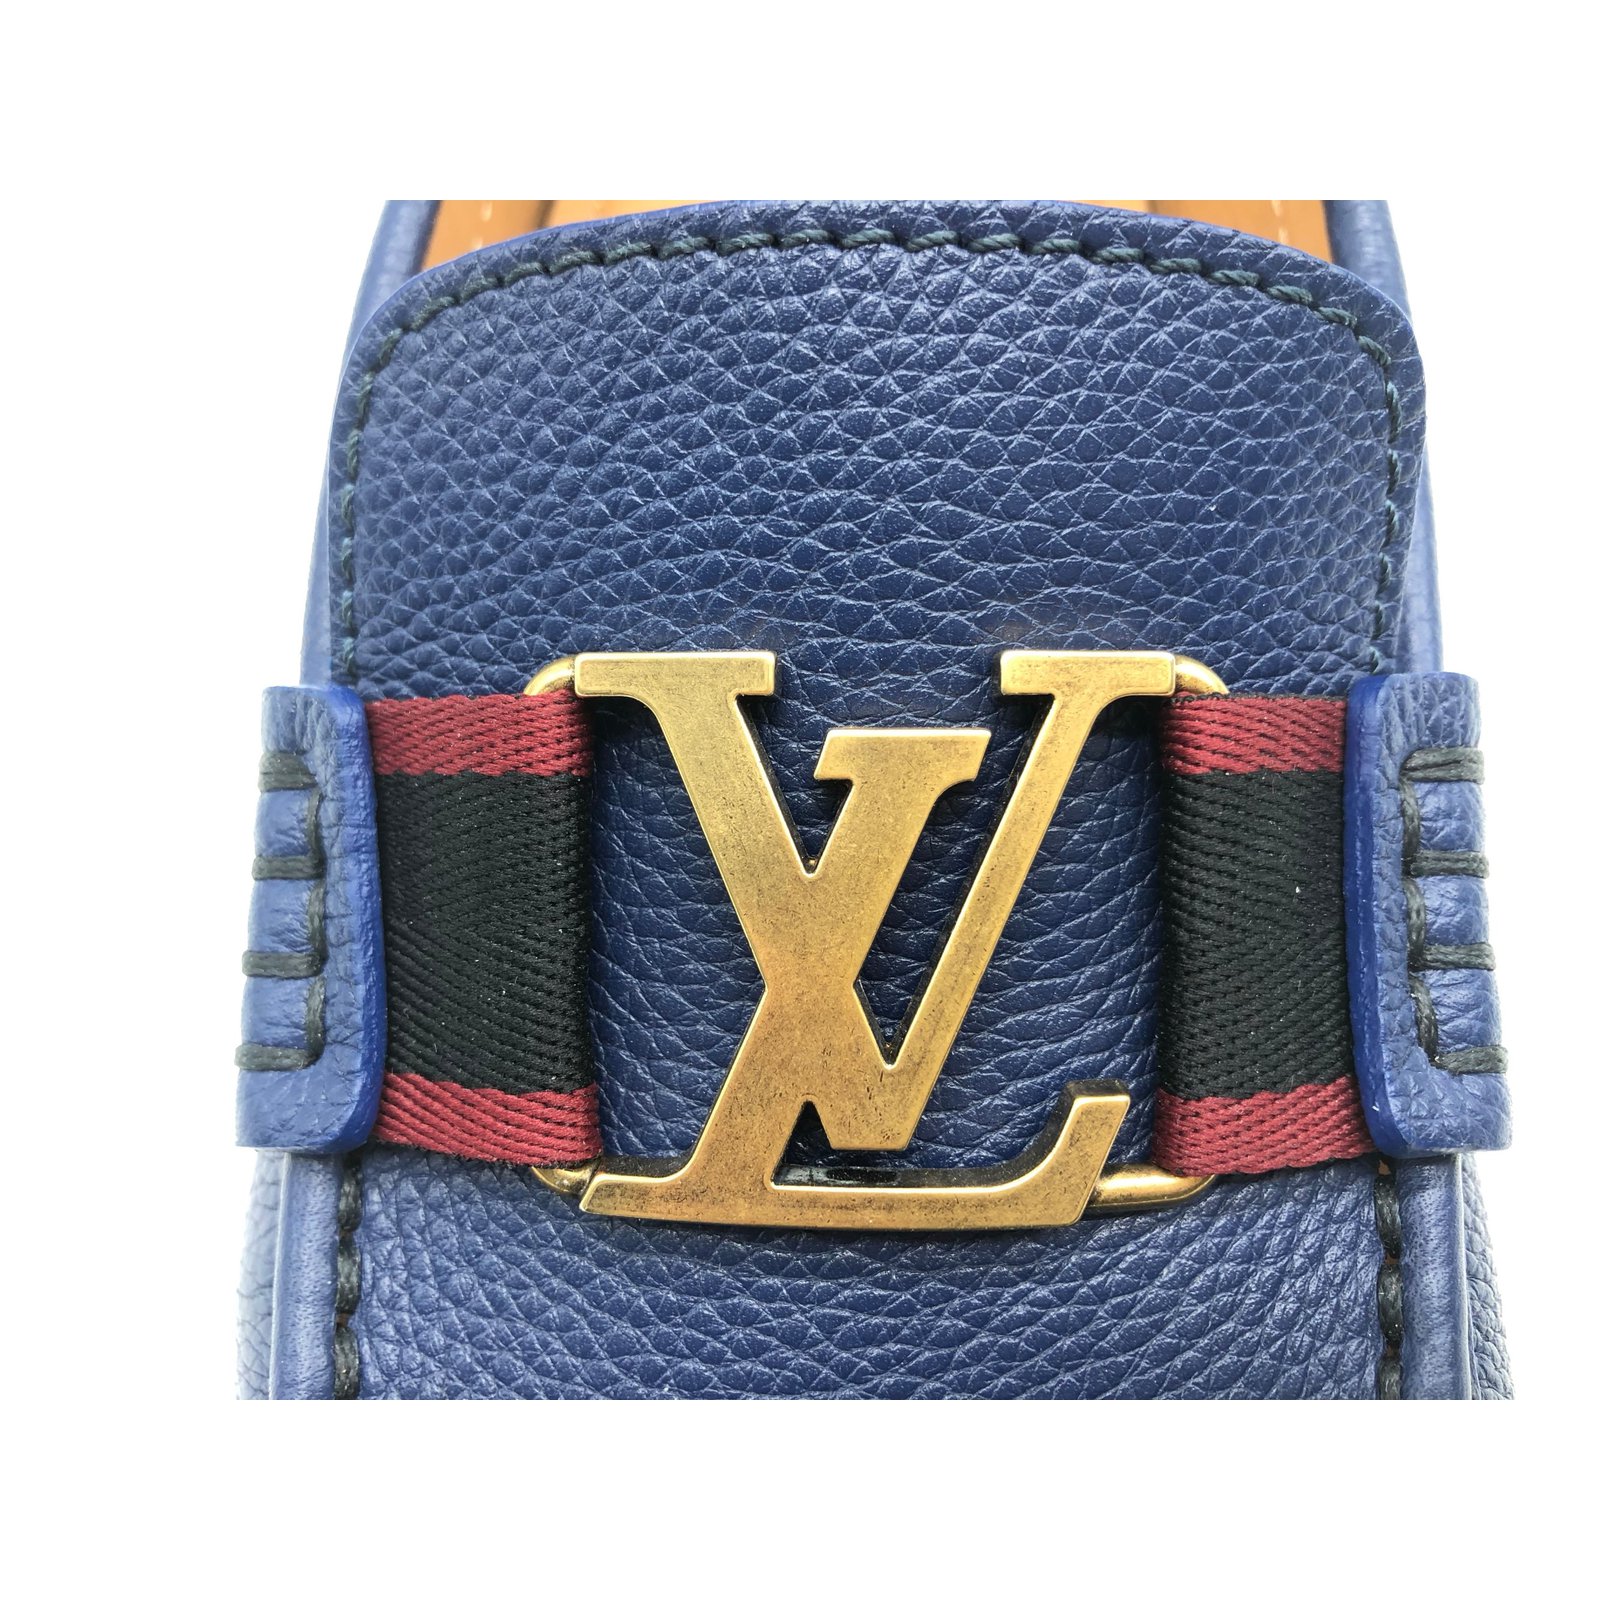 Louis Vuitton Navy Blue Monte Carlo Leather Moccasin 7 – The Closet